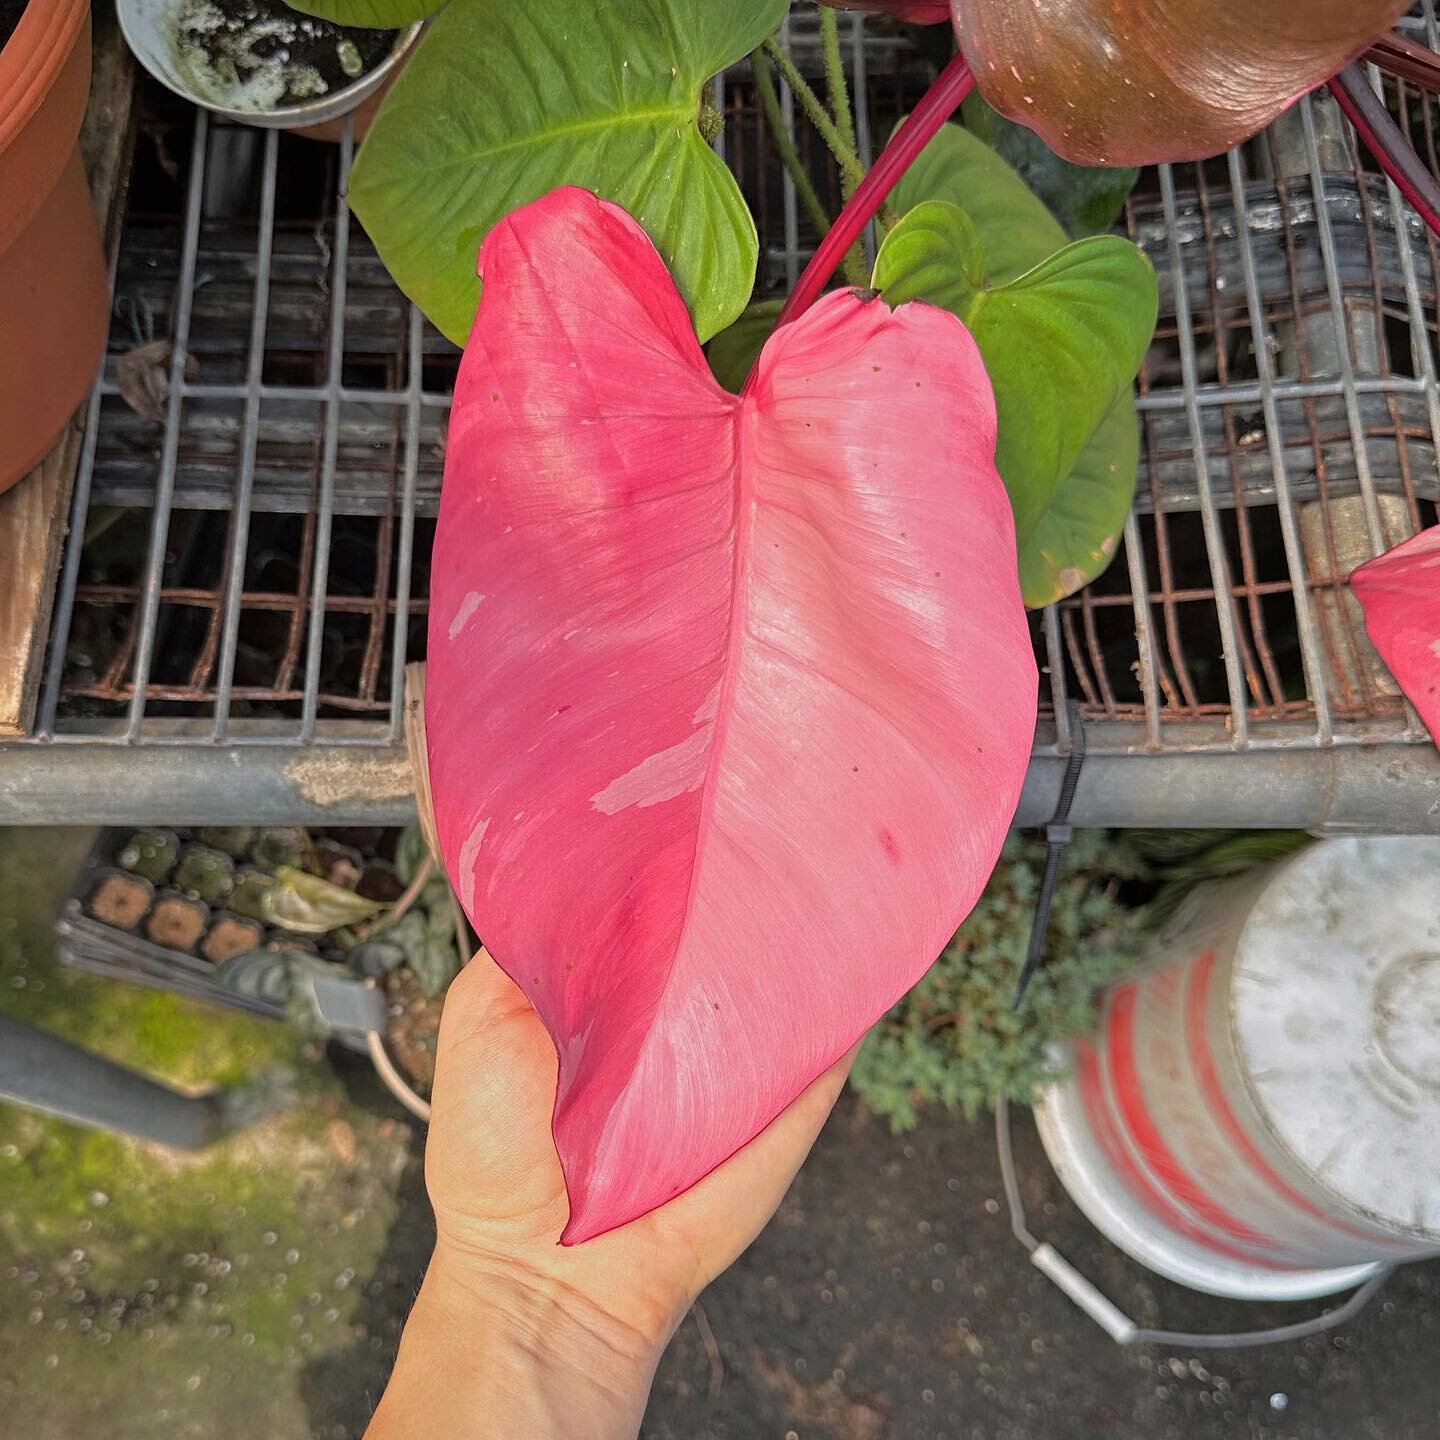 💗 Leaf Luv of Late 💗 If I see a pink leaf I&rsquo;m taking a pic! It seems to be somewhat universal to be attracted to a plant that is pink and not the typical green. Pink plants in general are having a moment of popularity for obvious reasons so I